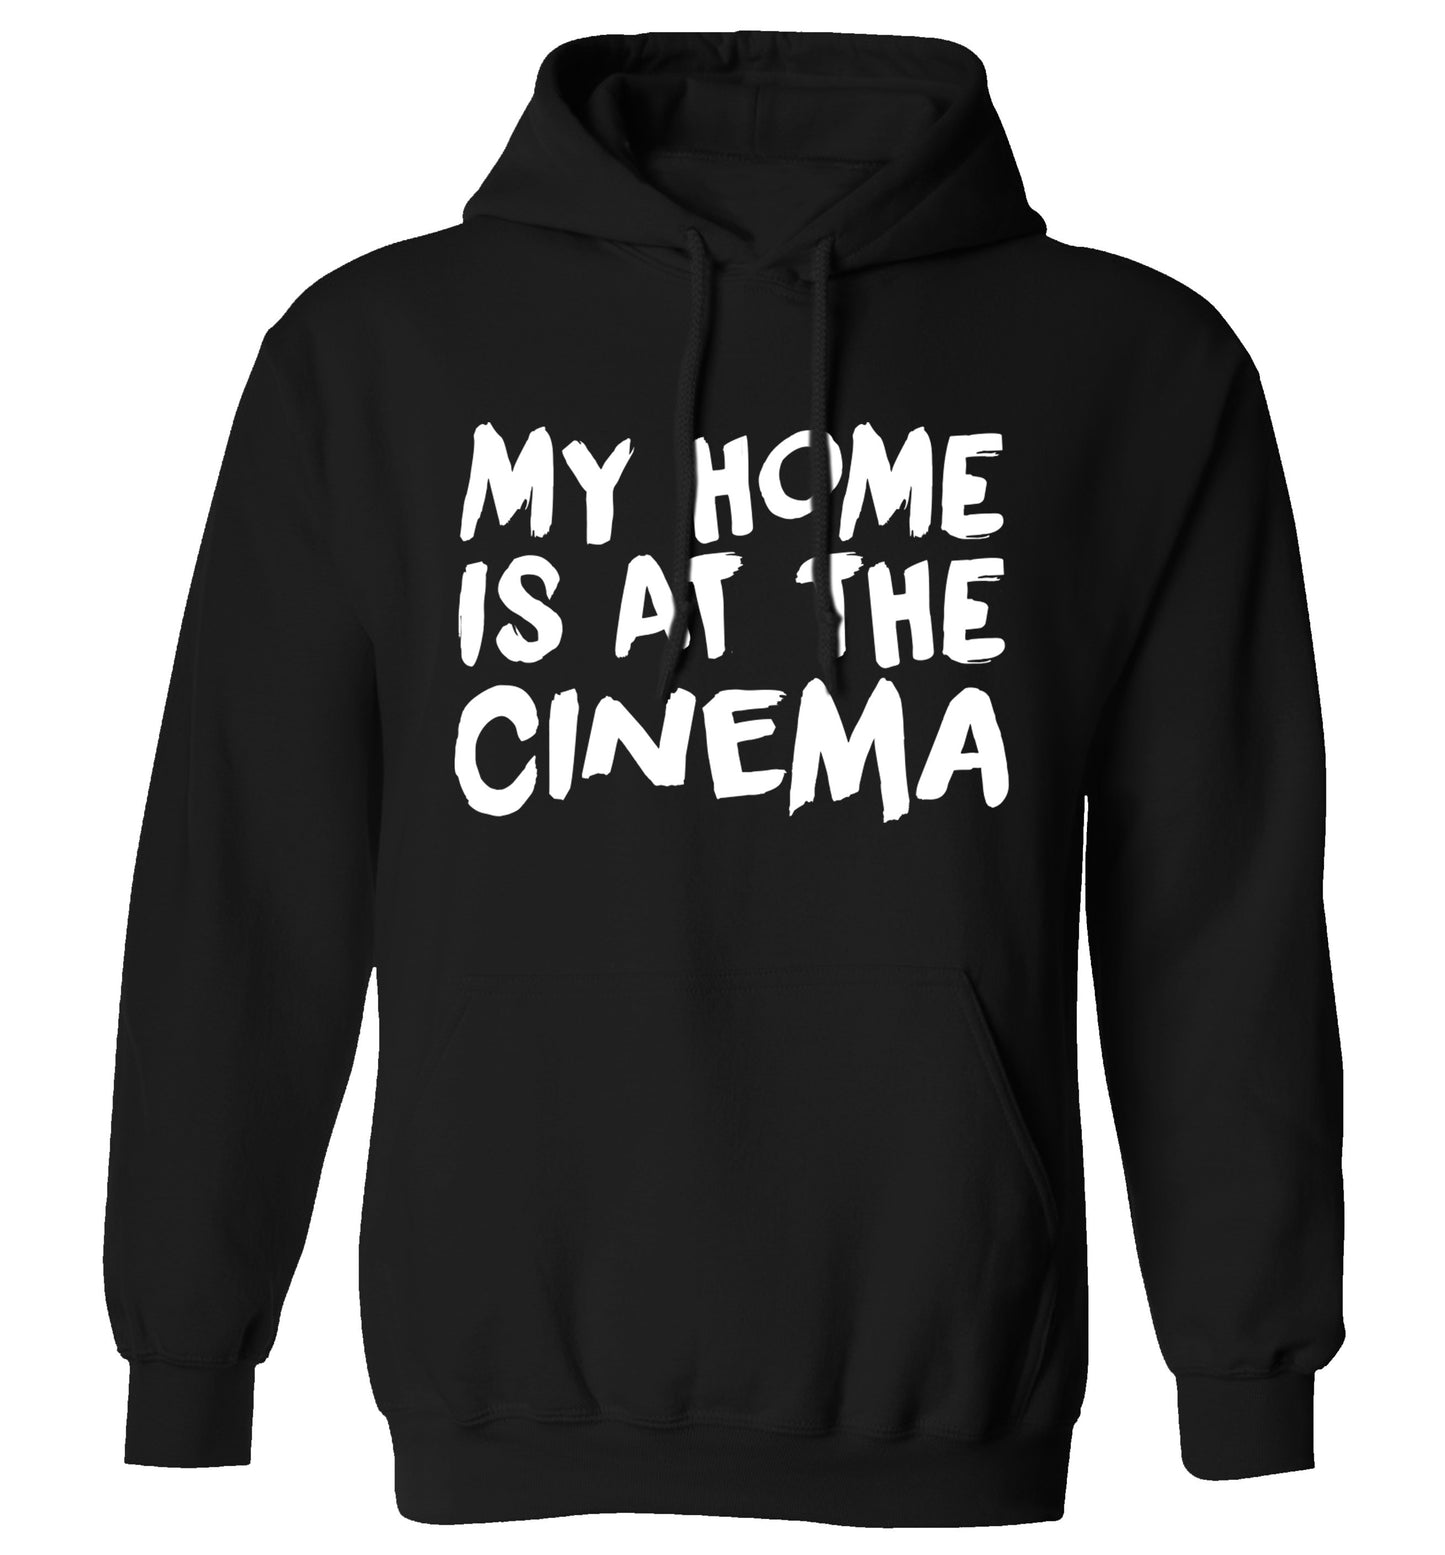 My home is at the cinema adults unisex black hoodie 2XL